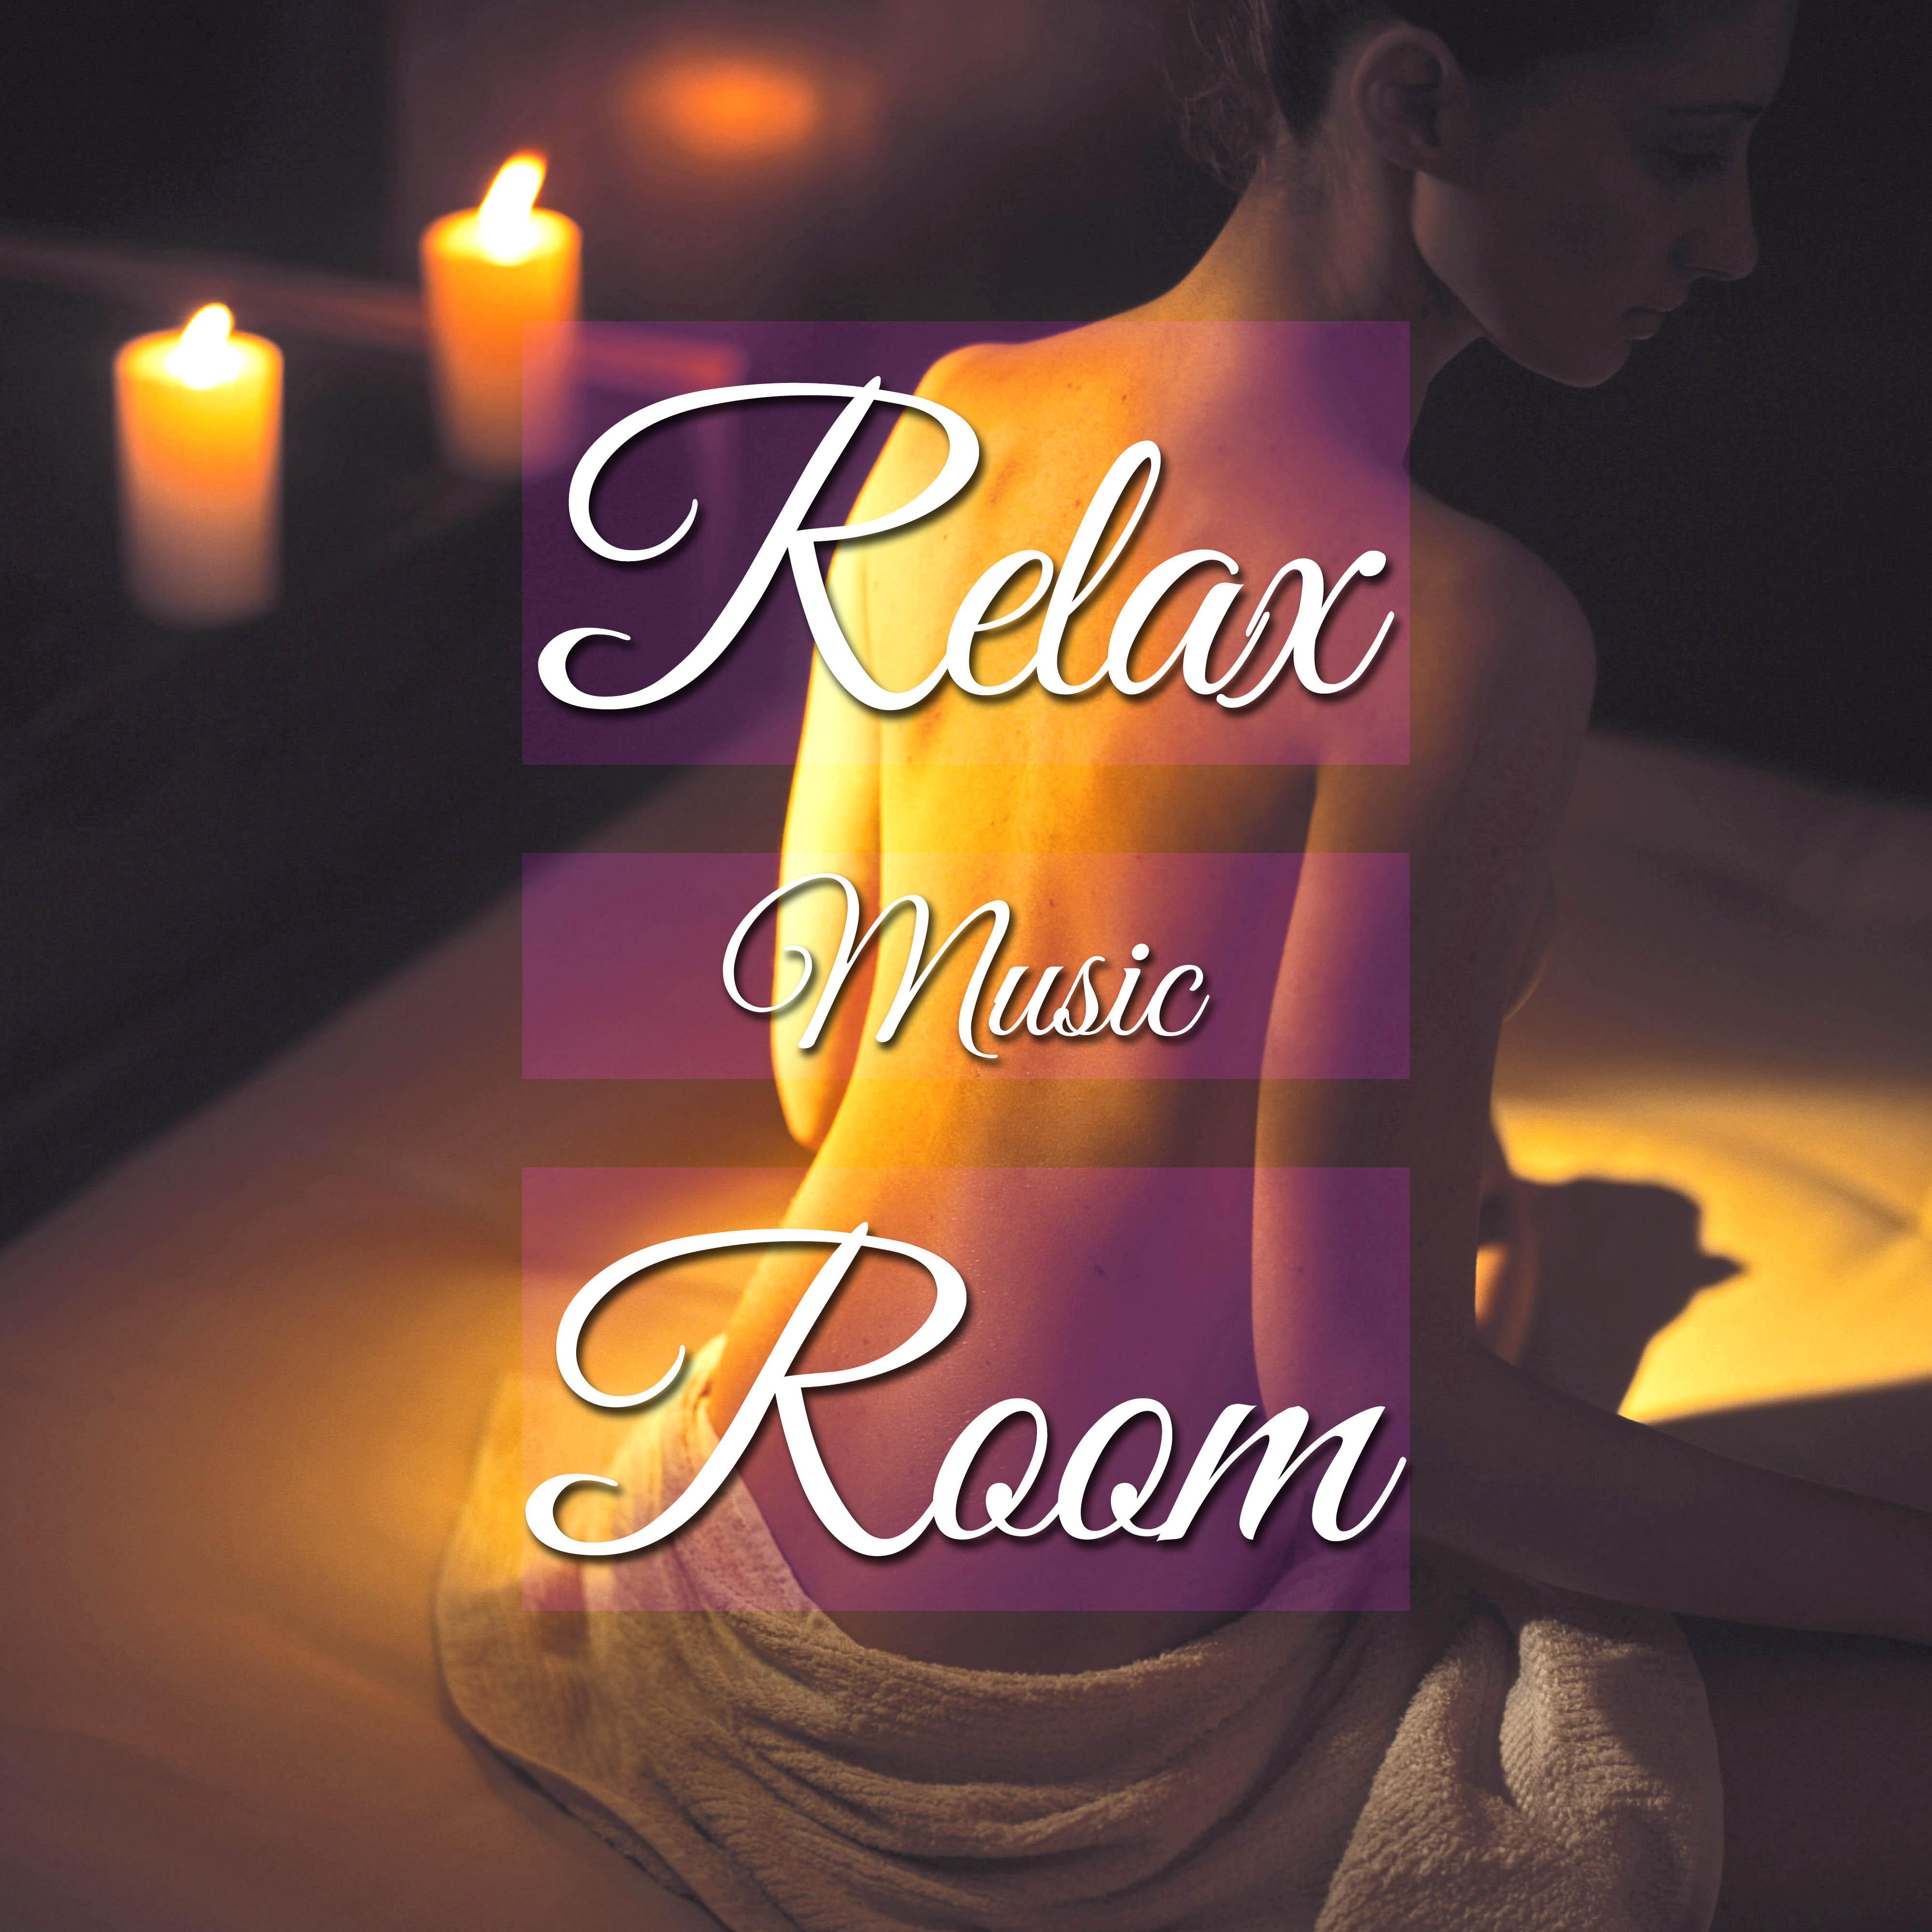 Relax Music Room: the Best Peaceful Relaxation Music Online to Sleep Better with Ambient Vibes, Healing Tunes and New Age Sounds